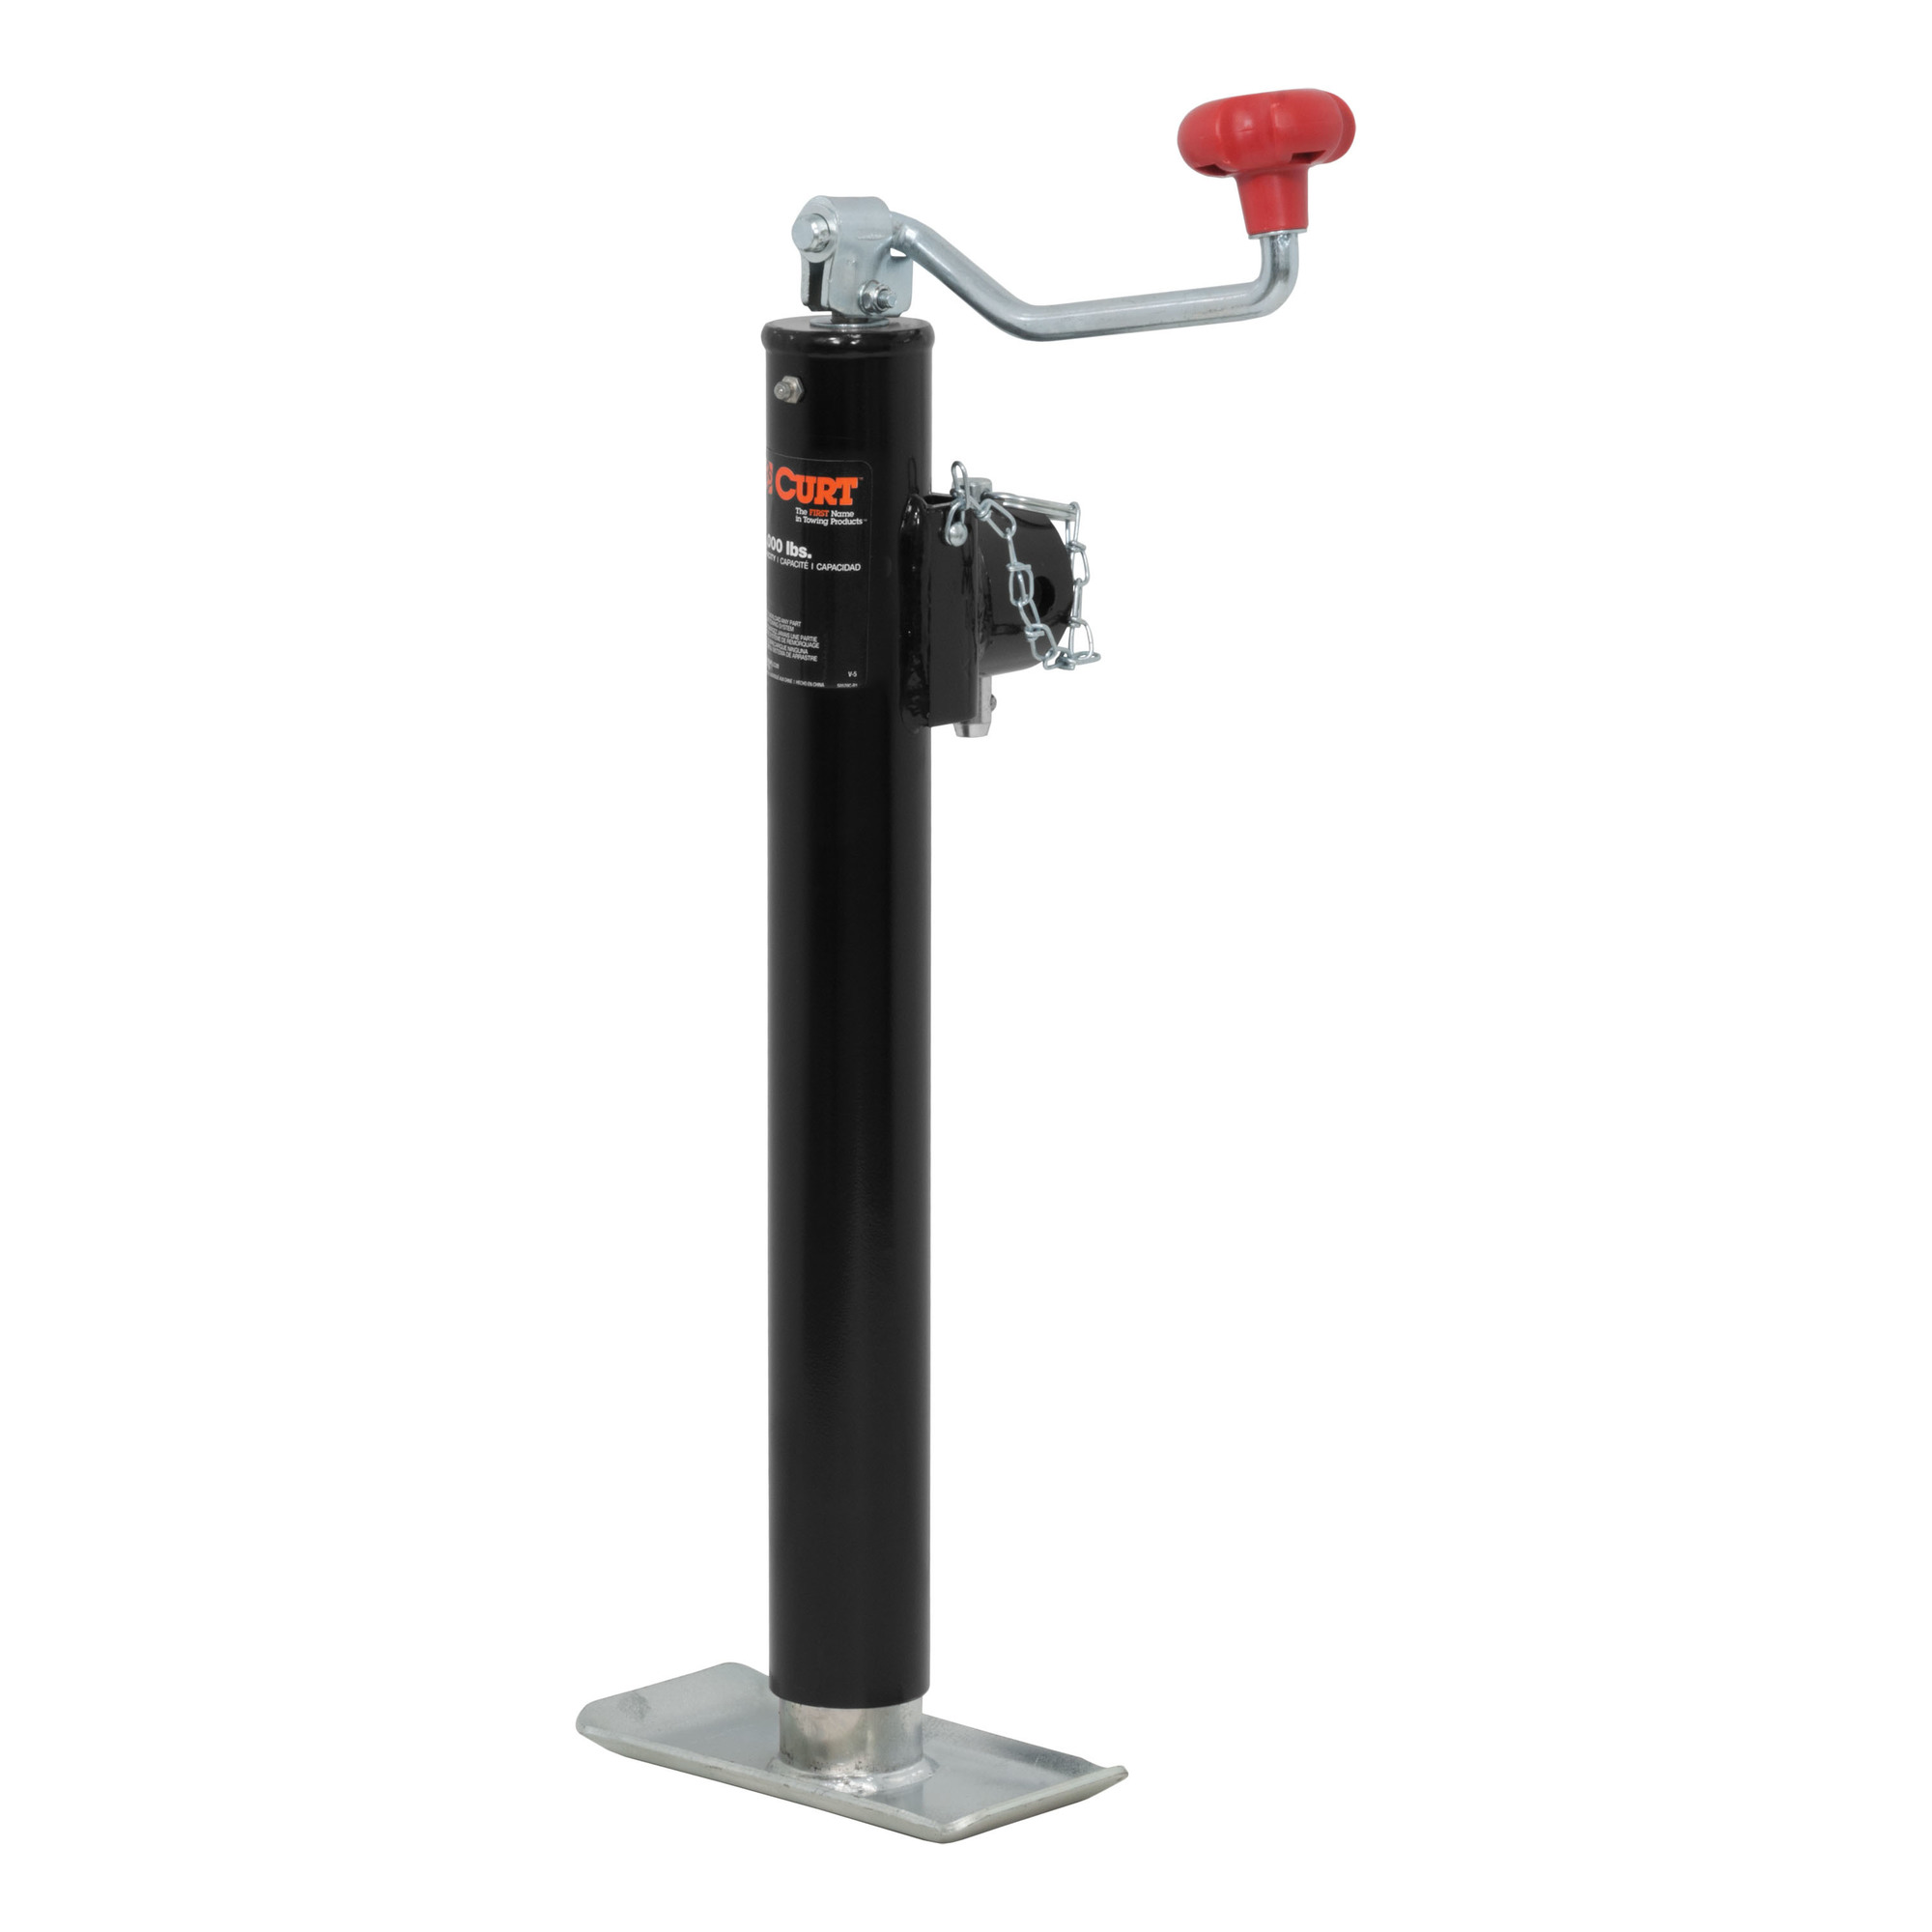 Curt Manufacturing, Pipe-Mnt Jack w Top Handle 5 000 lbs 15Inch Travel, Lift Capacity 5000 lb, Jack Type Topwind, Mount Type Weld-On, Model 28356